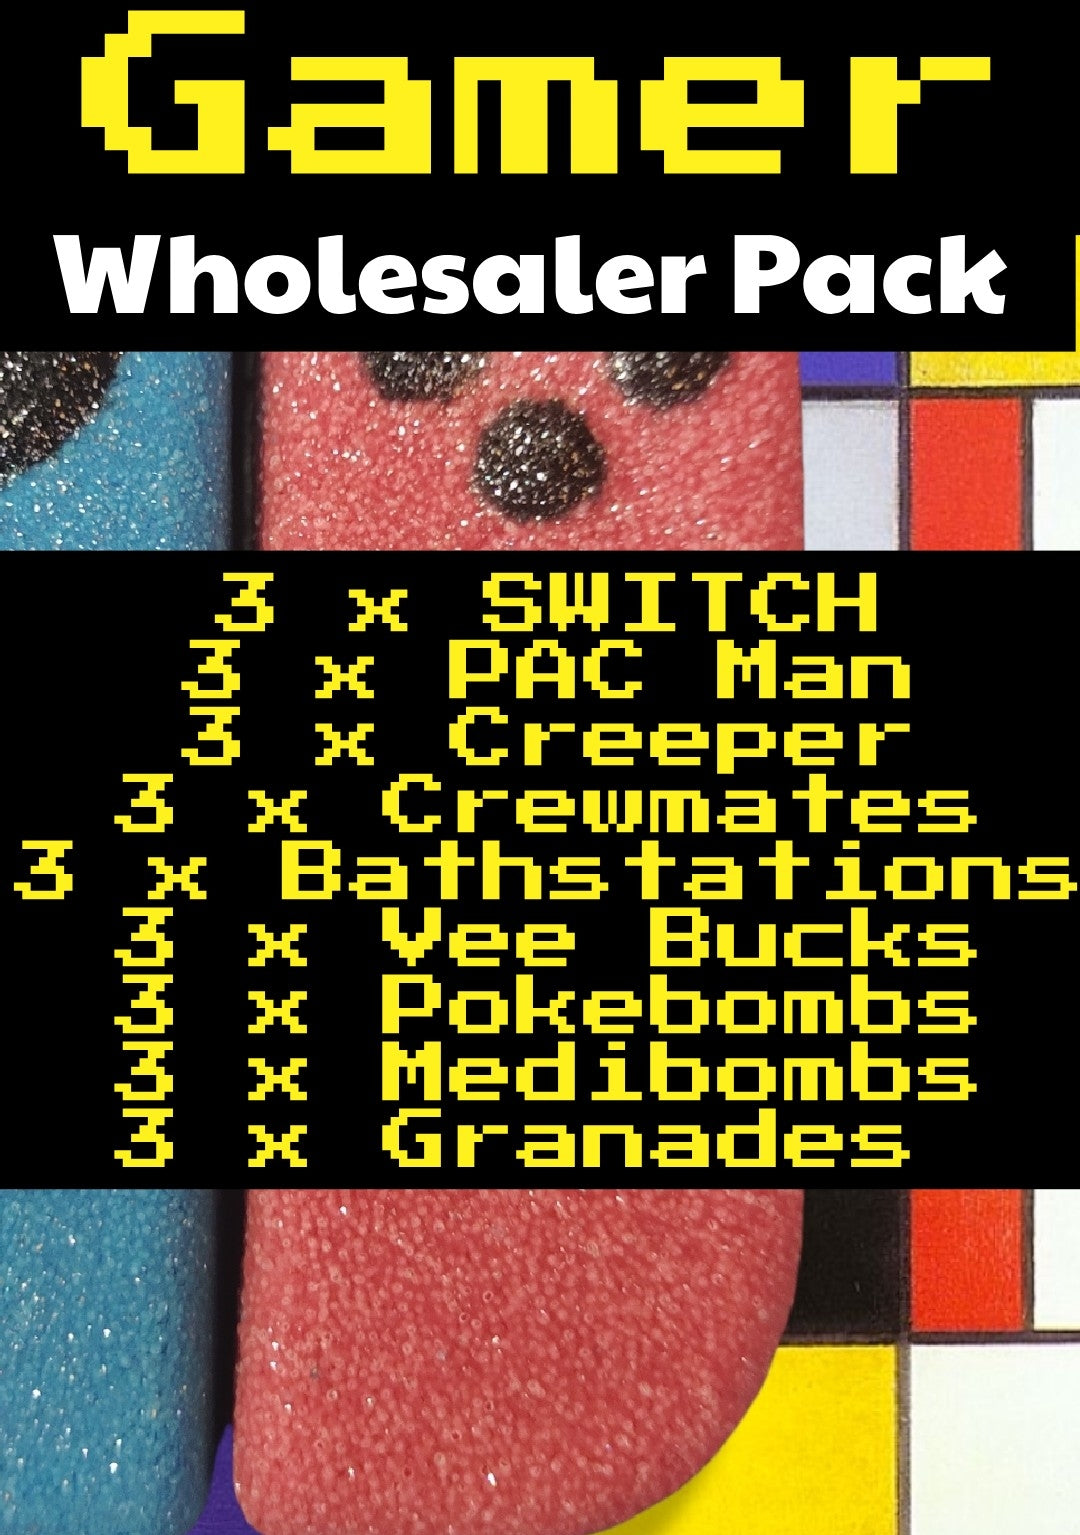 Gamer Collection Wholesale Pack